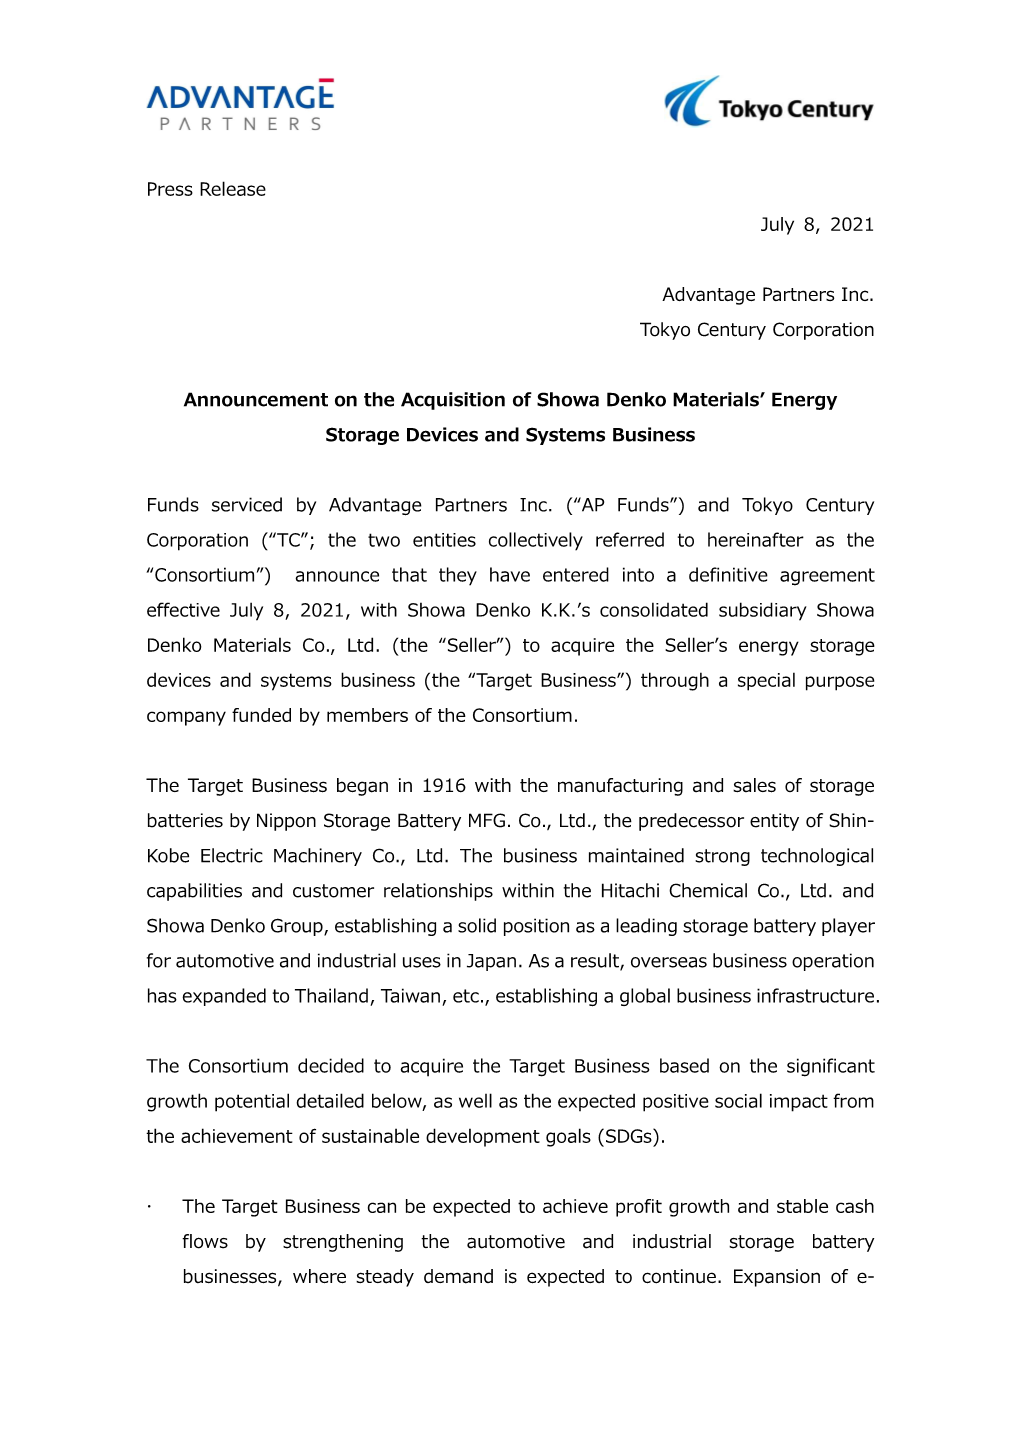 Announcement on the Acquisition of Showa Denko Materials' Energy